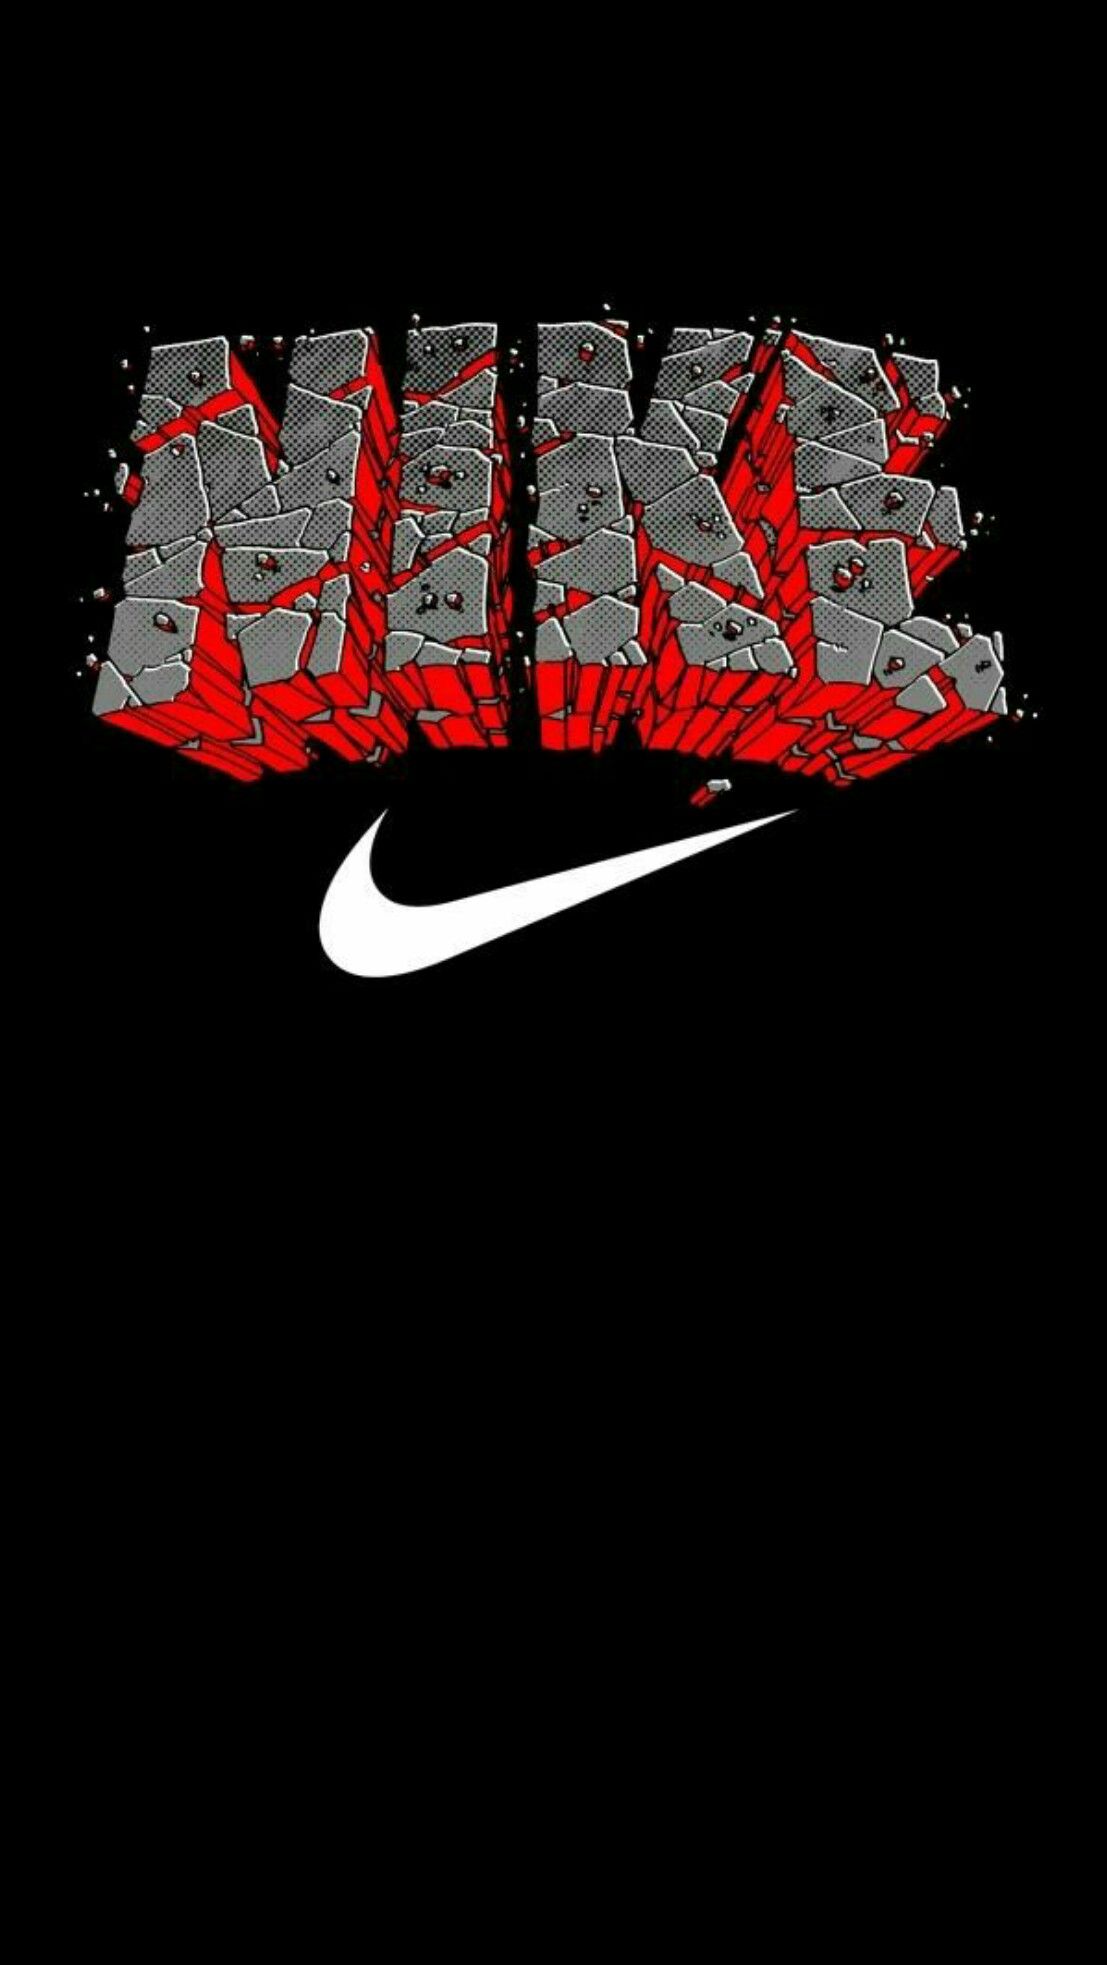 Nike Wallpaper For Android Nike T Shirt Design